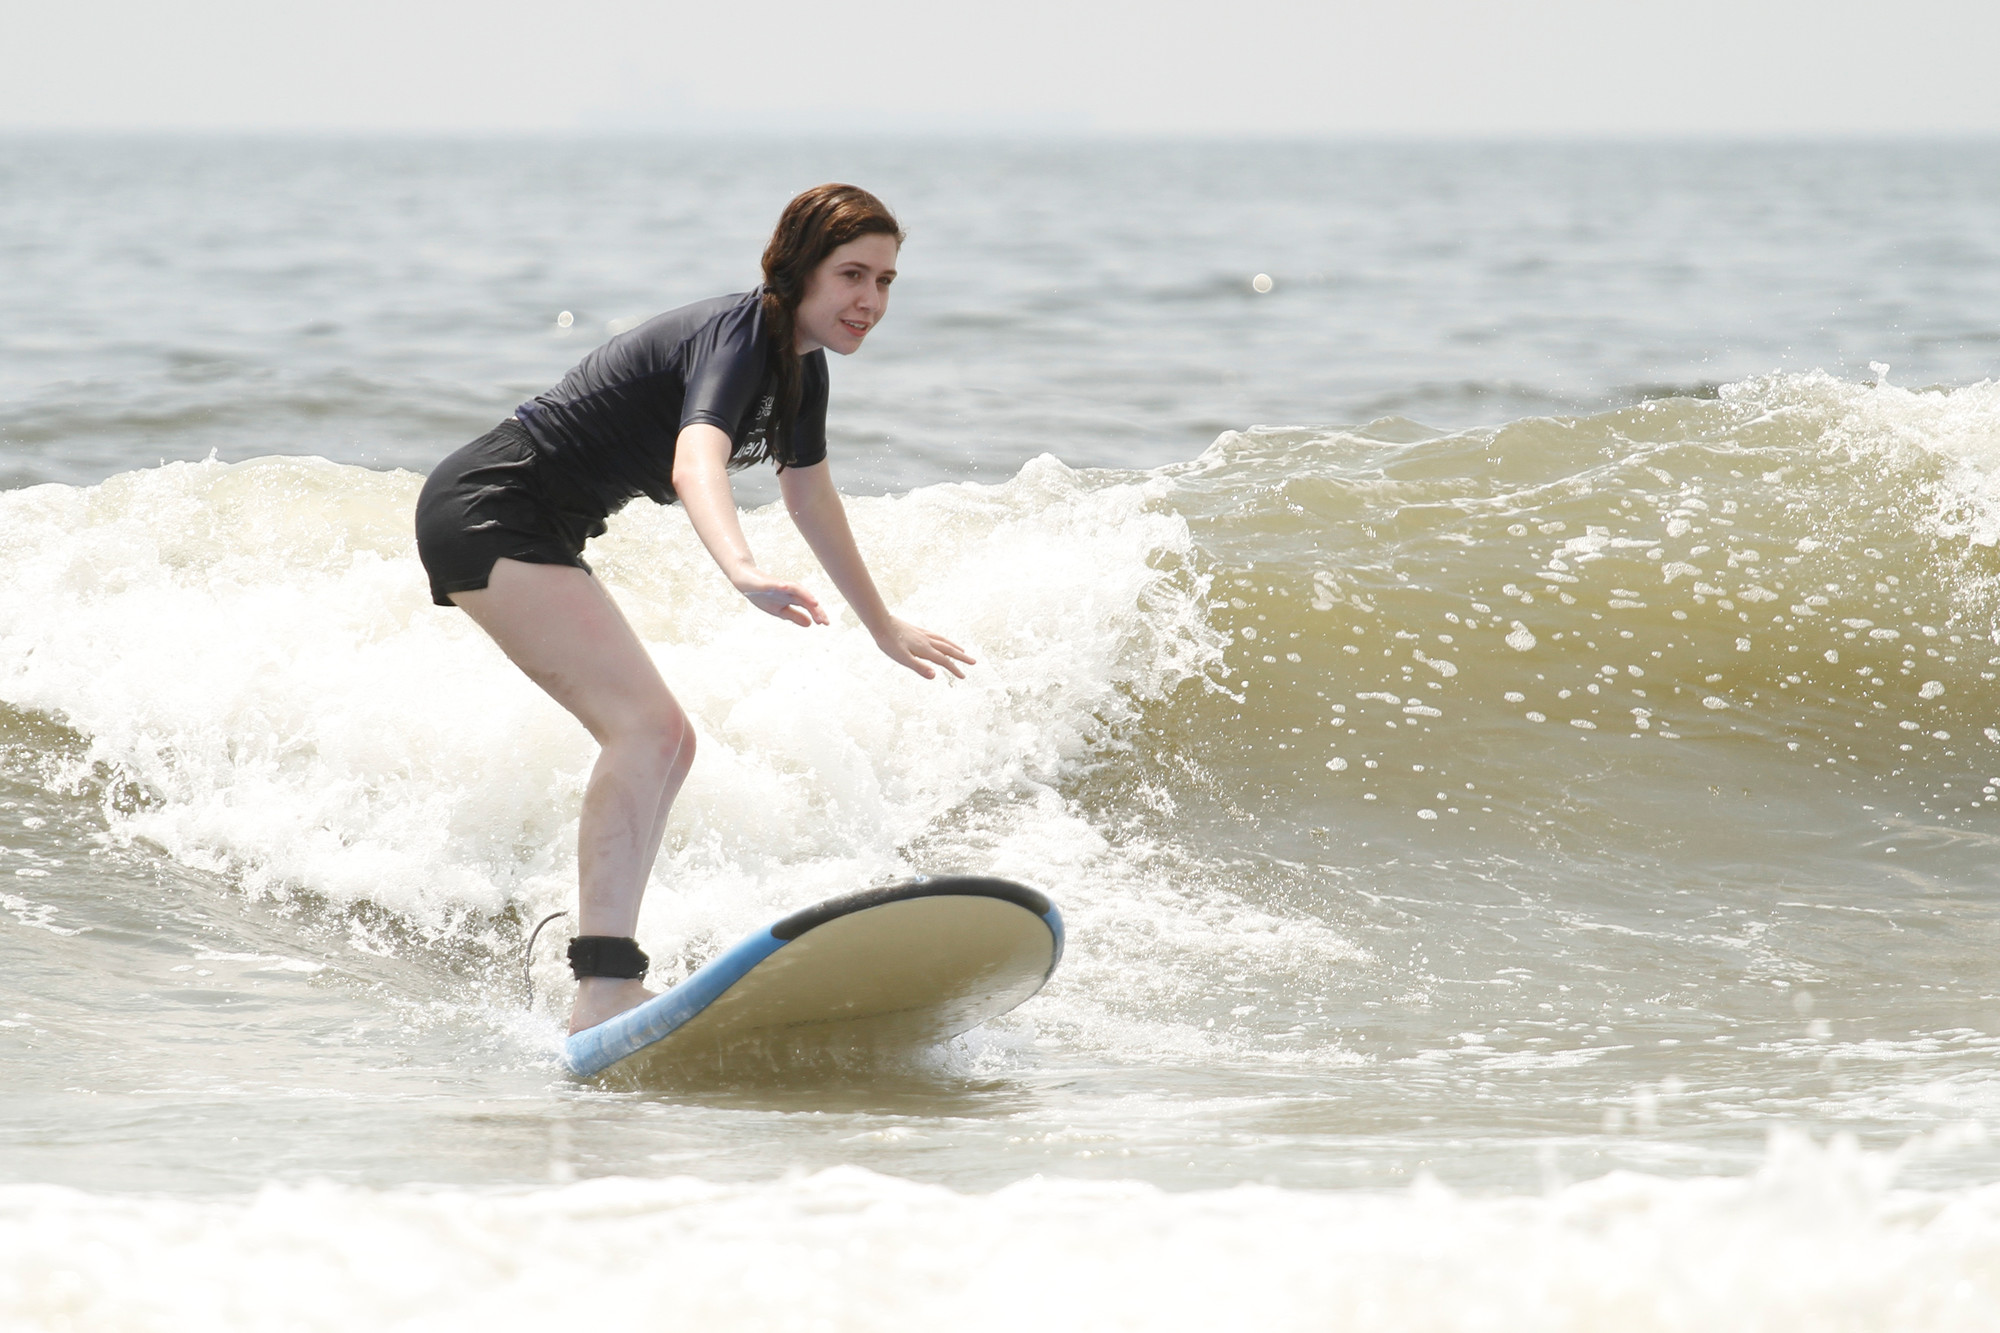 Herald intern Shannon Plackis tried surfing for the first time in our “Never Have I Ever” series.